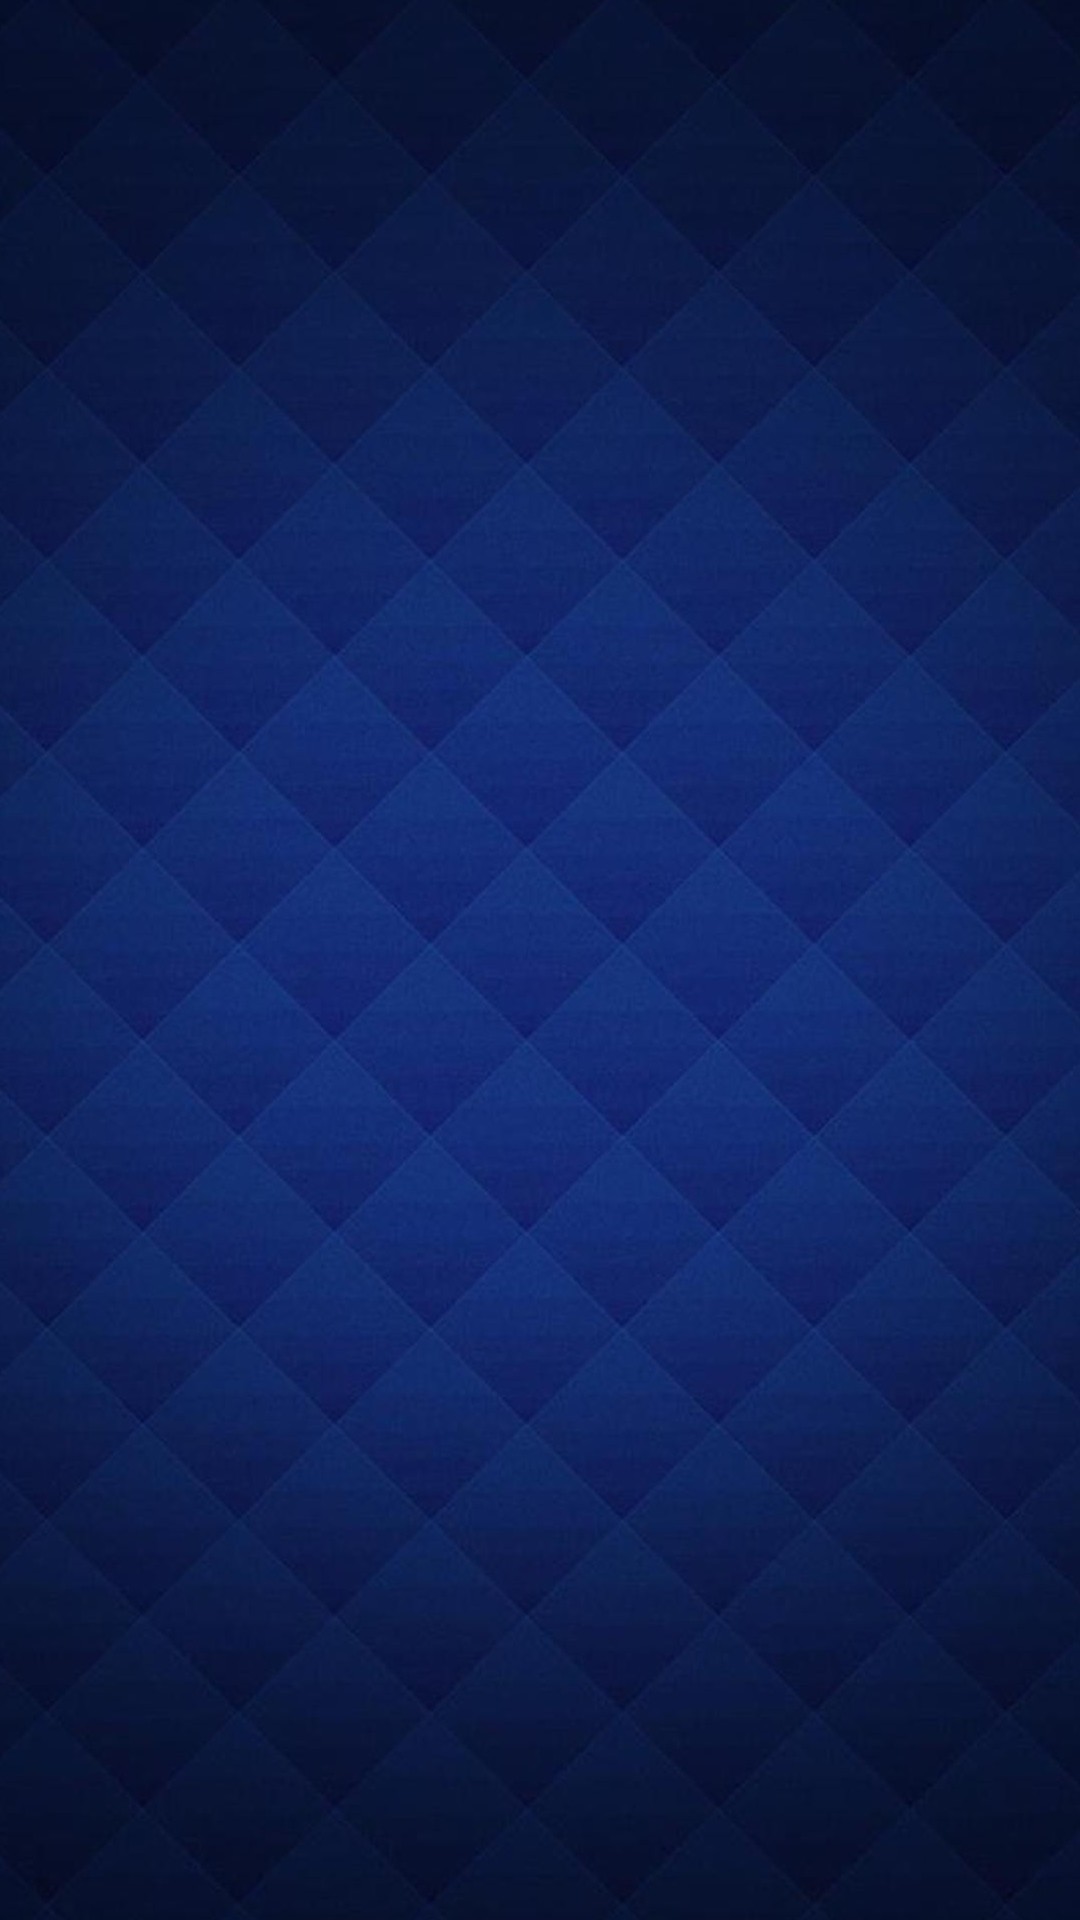 Texture Xperia Z Wallpapers Hd 23 
 Data Src Sony Xperia - Iphone Blue Wallpaper Hd - HD Wallpaper 